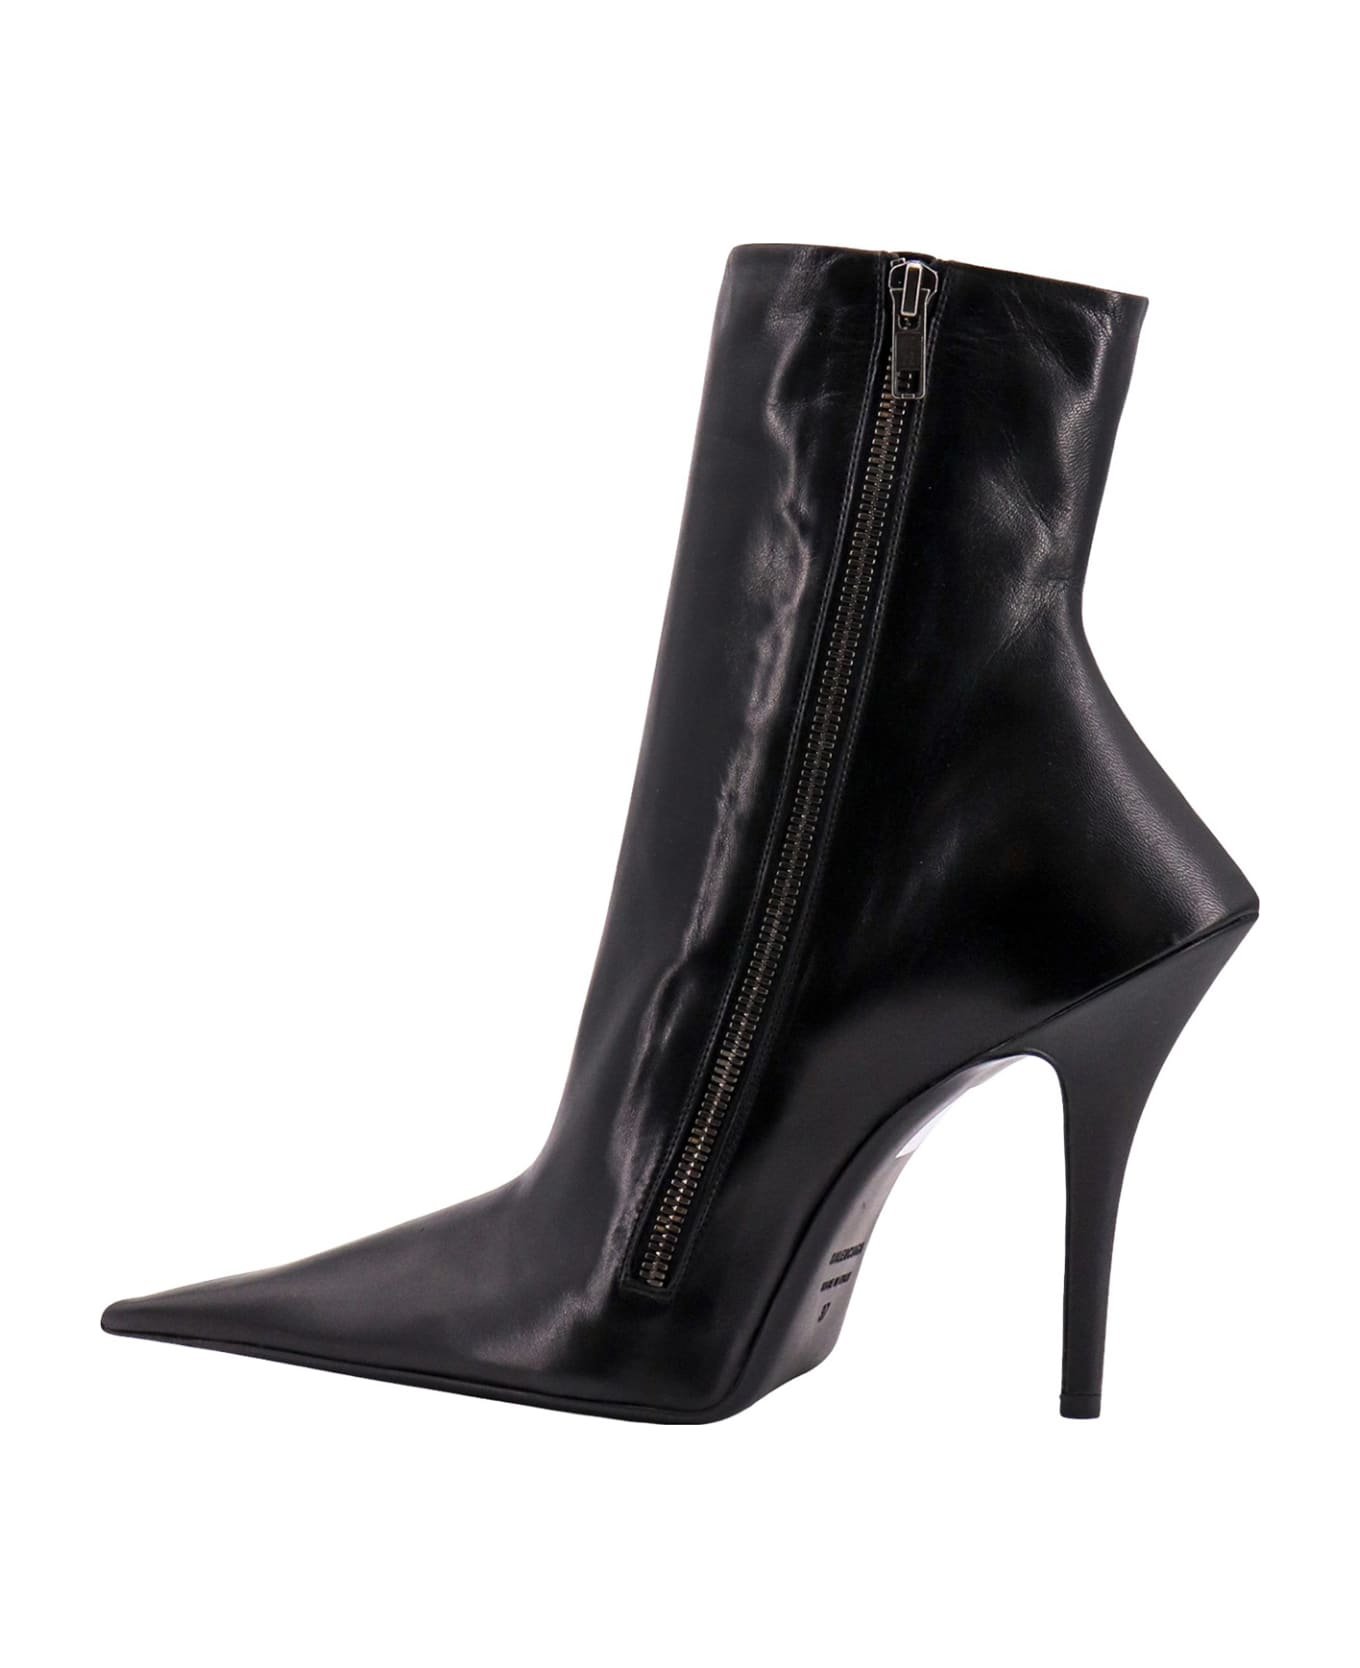 Balenciaga Witch Ankle Boots - Black